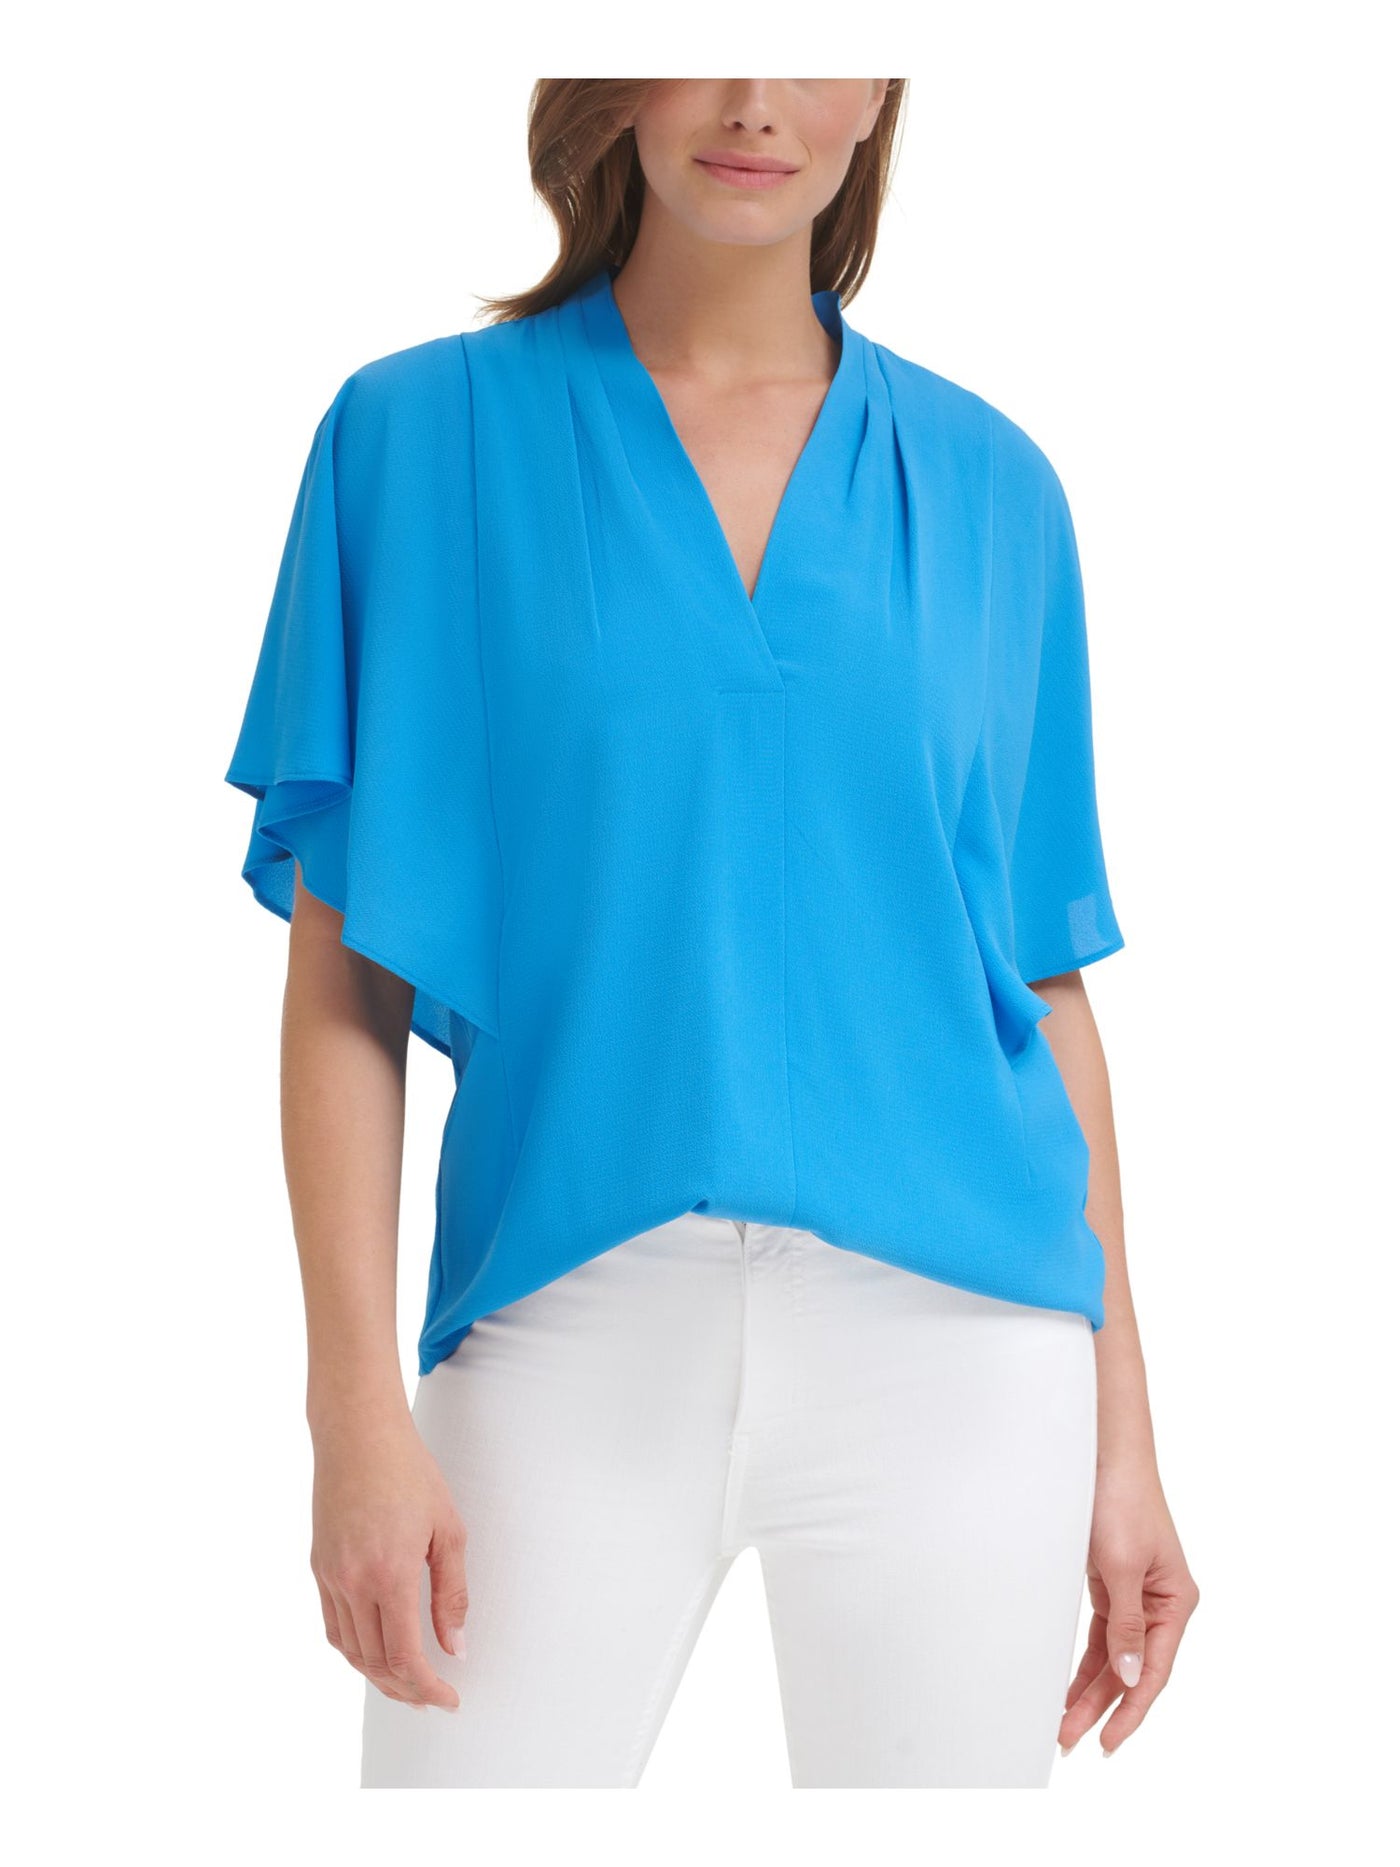 CALVIN KLEIN PERFORMANCE Womens Blue Stretch Pleated Draped V-neck Flutter Sleeve Wear To Work Top M